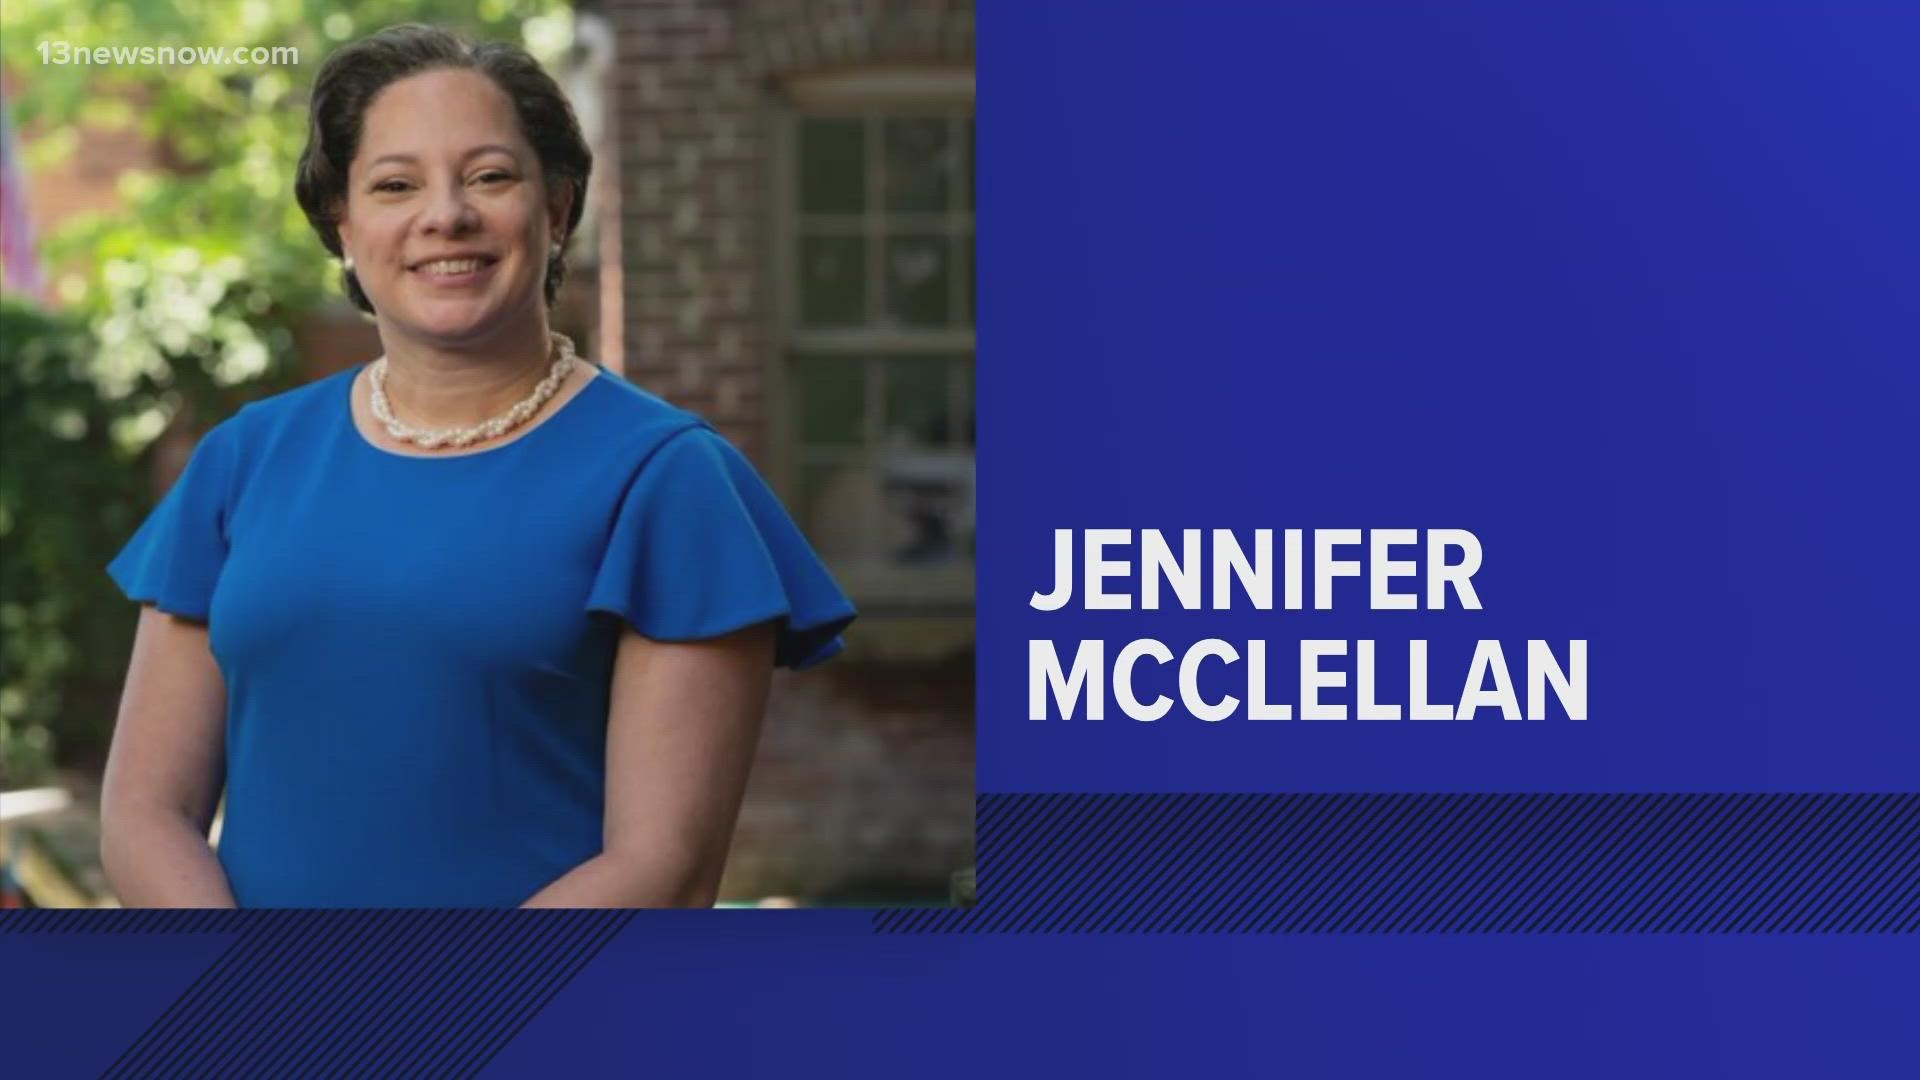 Jennifer McClellan will become the first Black woman to represent Virginia in Congress.